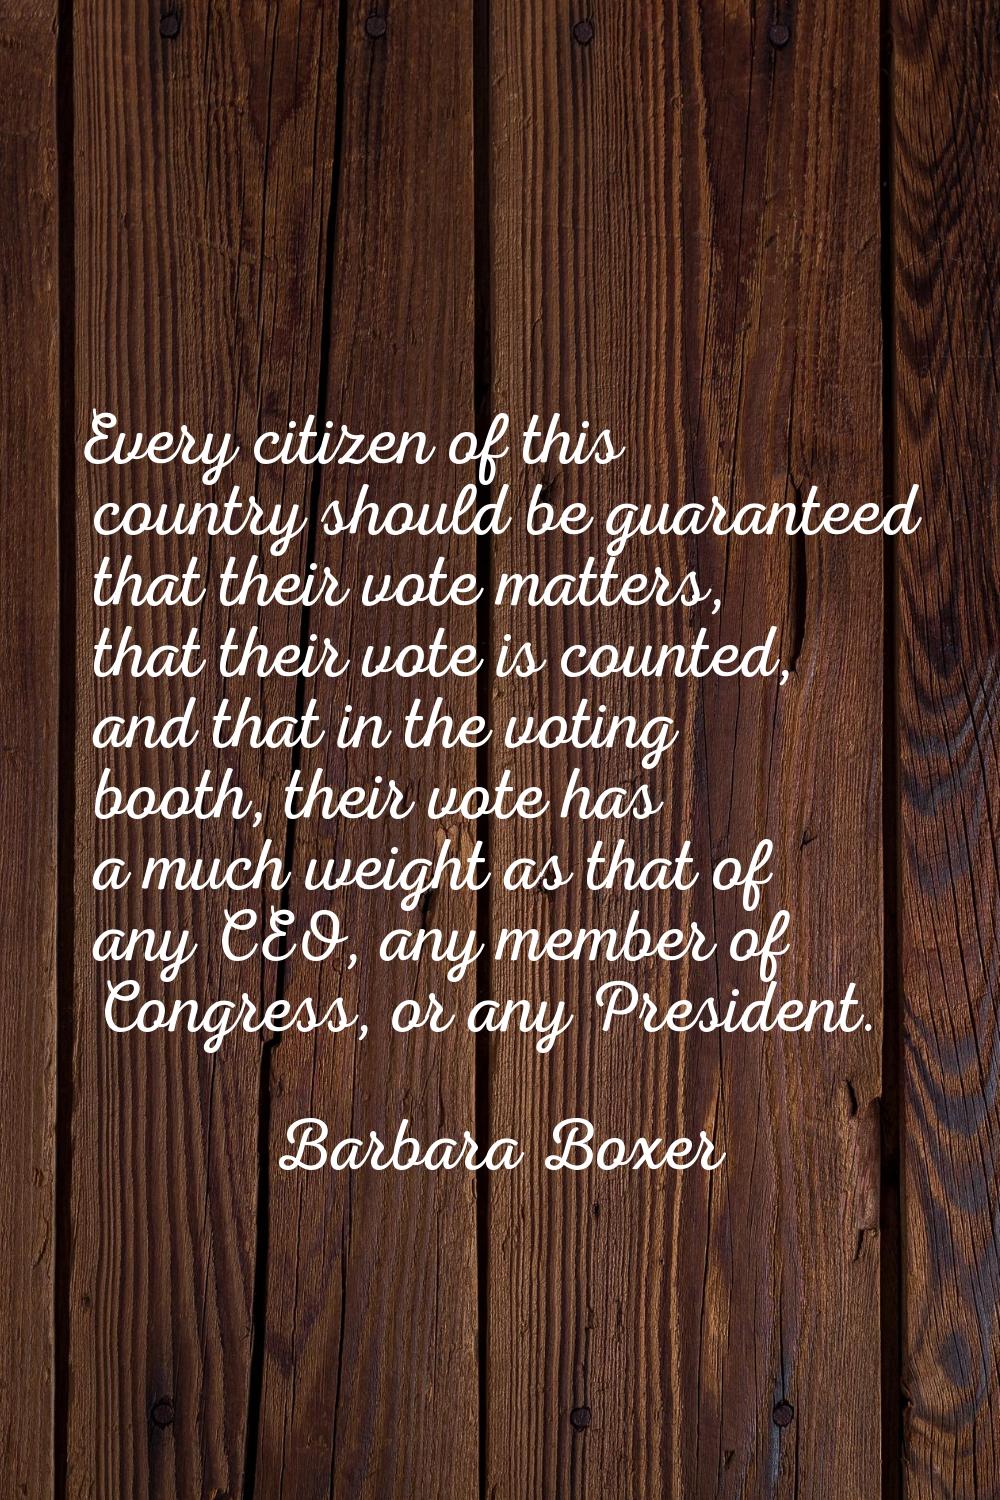 Every citizen of this country should be guaranteed that their vote matters, that their vote is coun